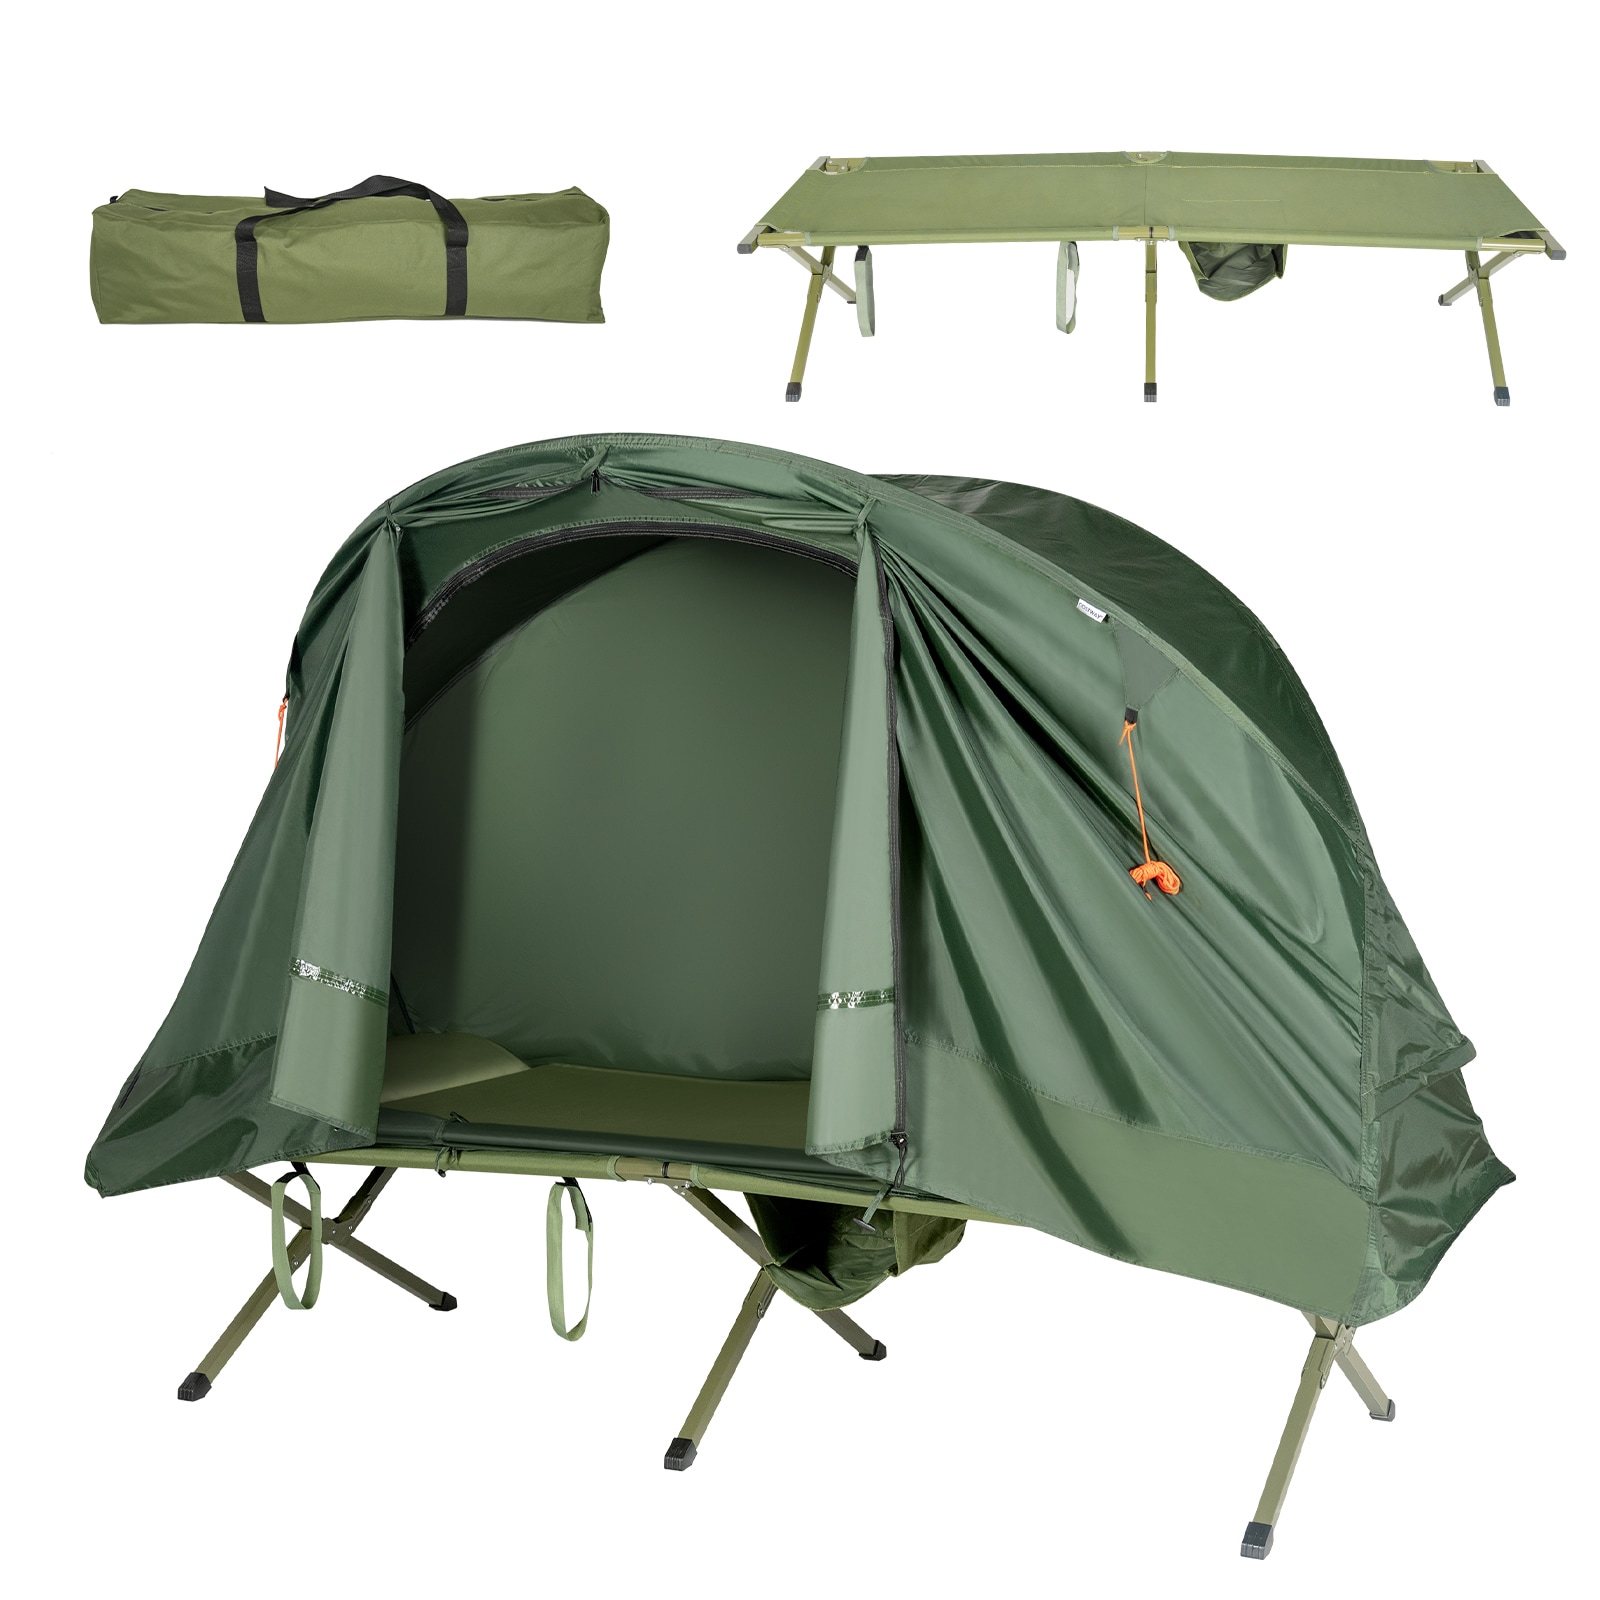 2.8 Foot Wide Tents at